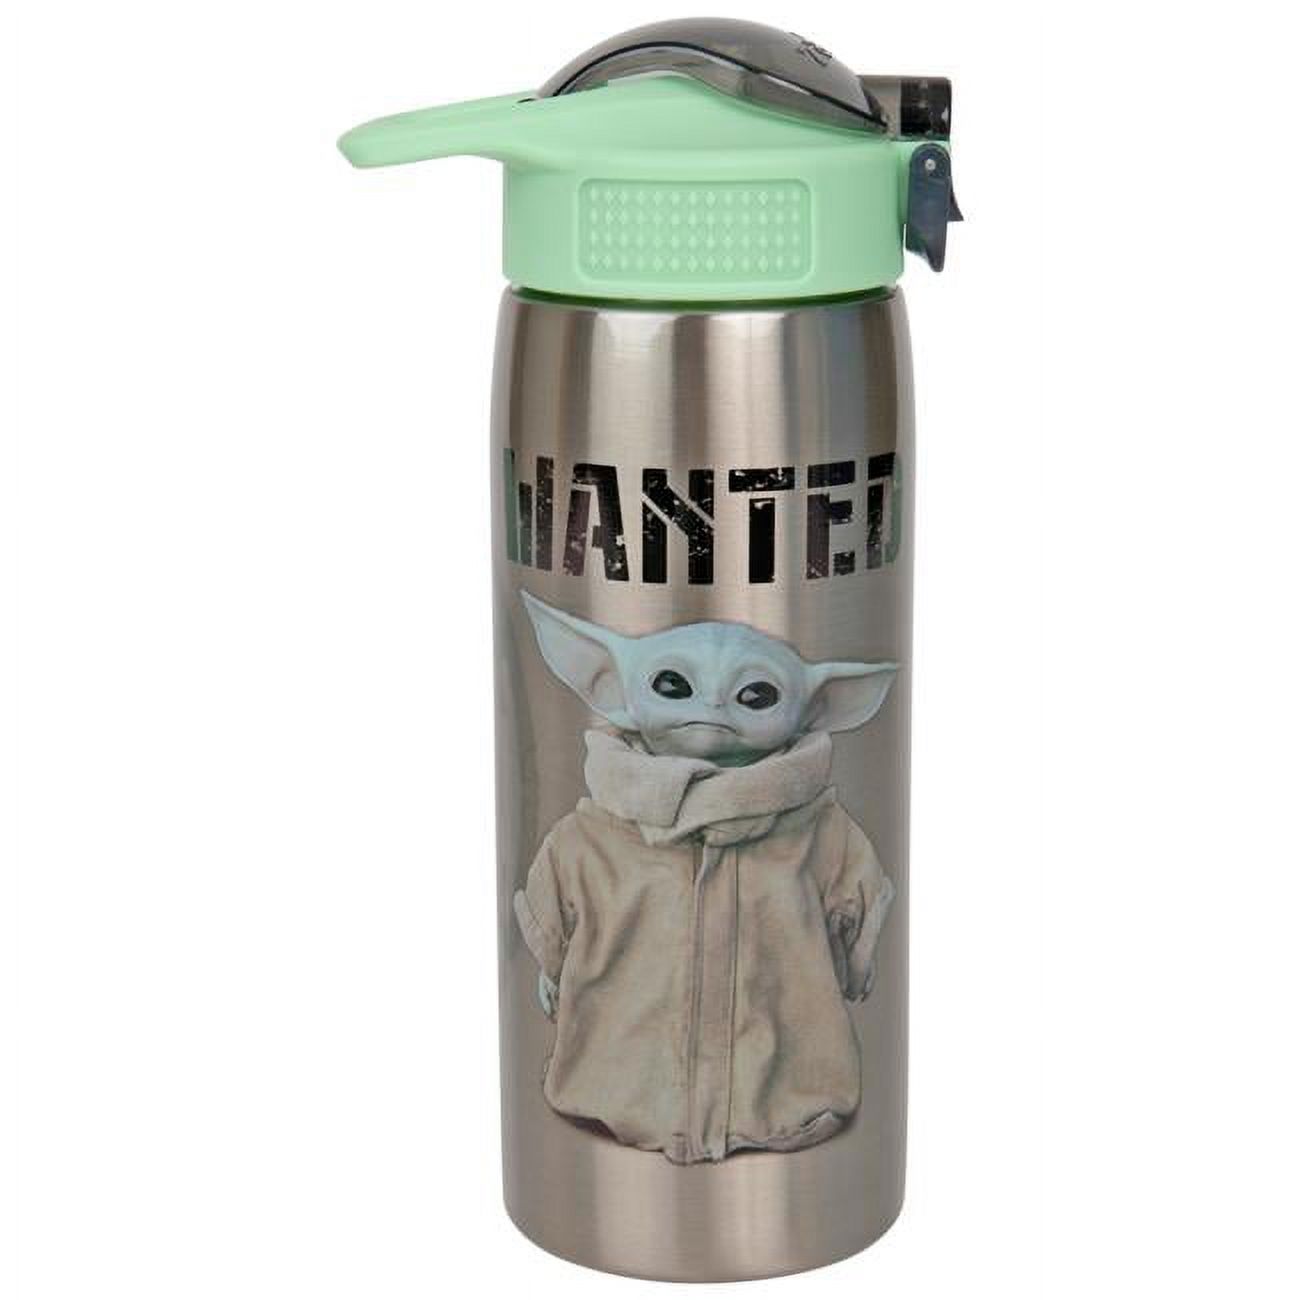 Zak Designs Star Wars: The Mandalorian 19 Ounce Stainless Steel Water Bottle, The Child - image 1 of 6